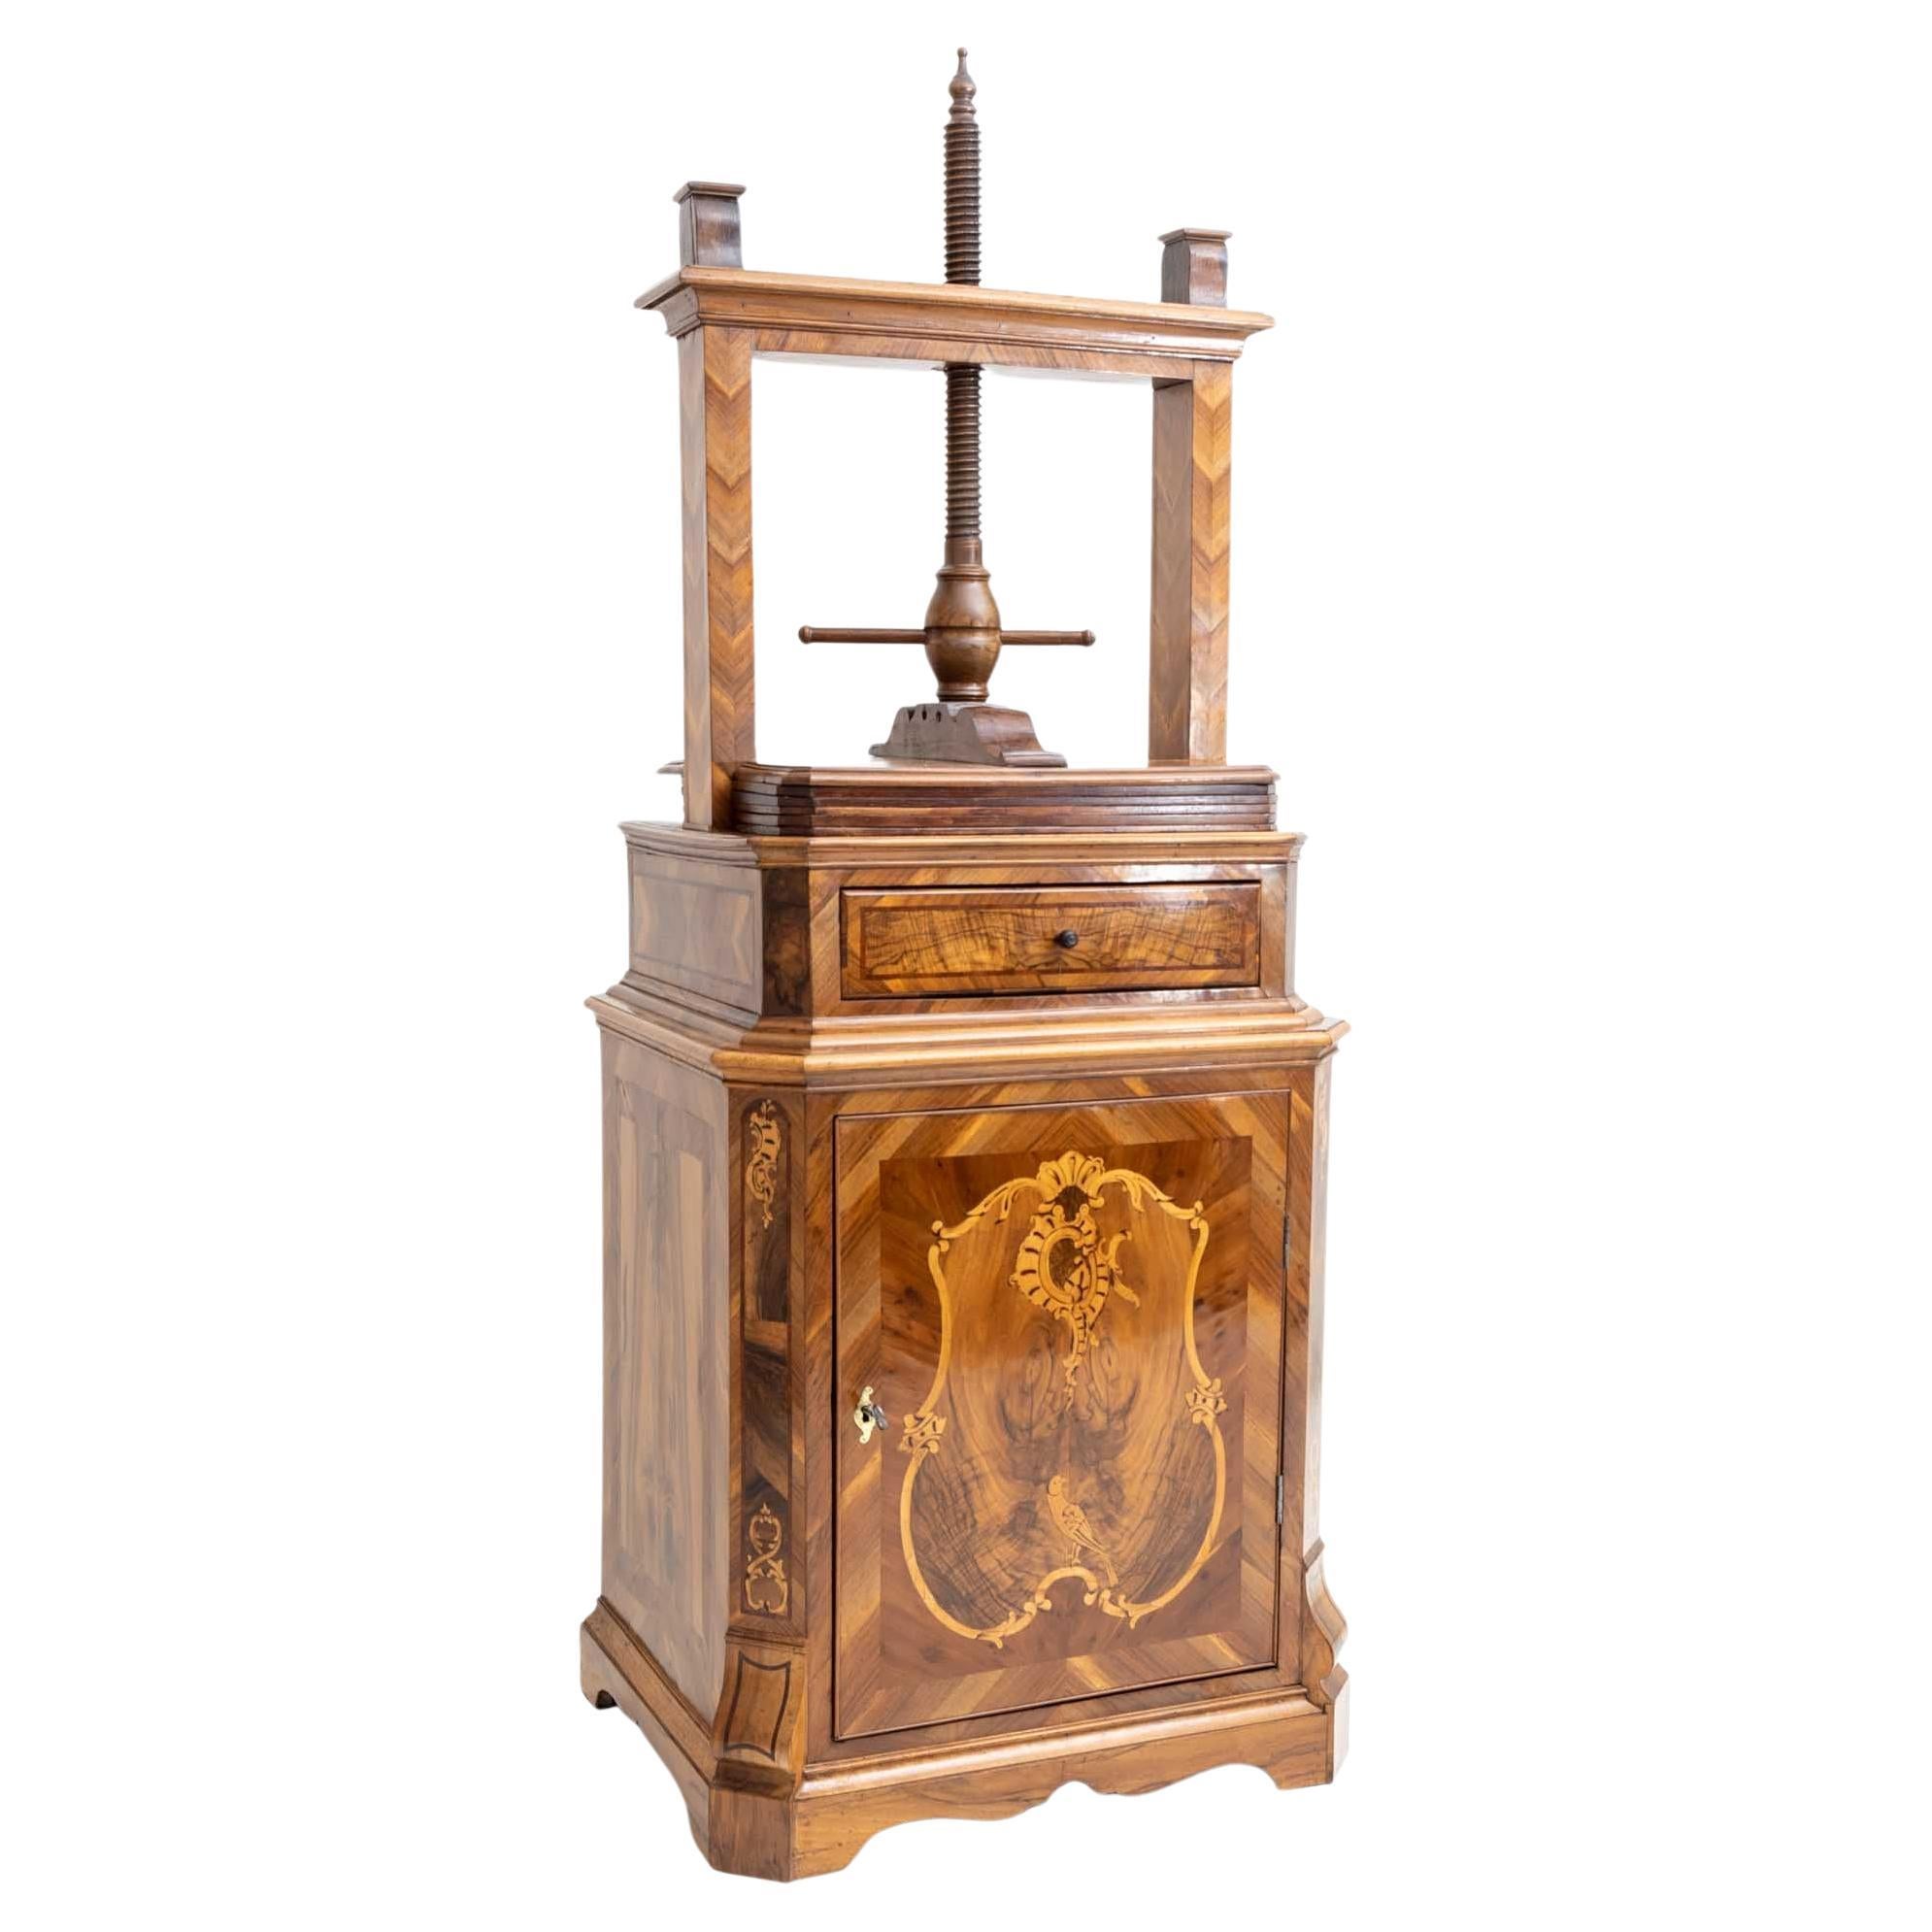 Linen Press with Spindle, Walnut with Inlays, 18th Century For Sale